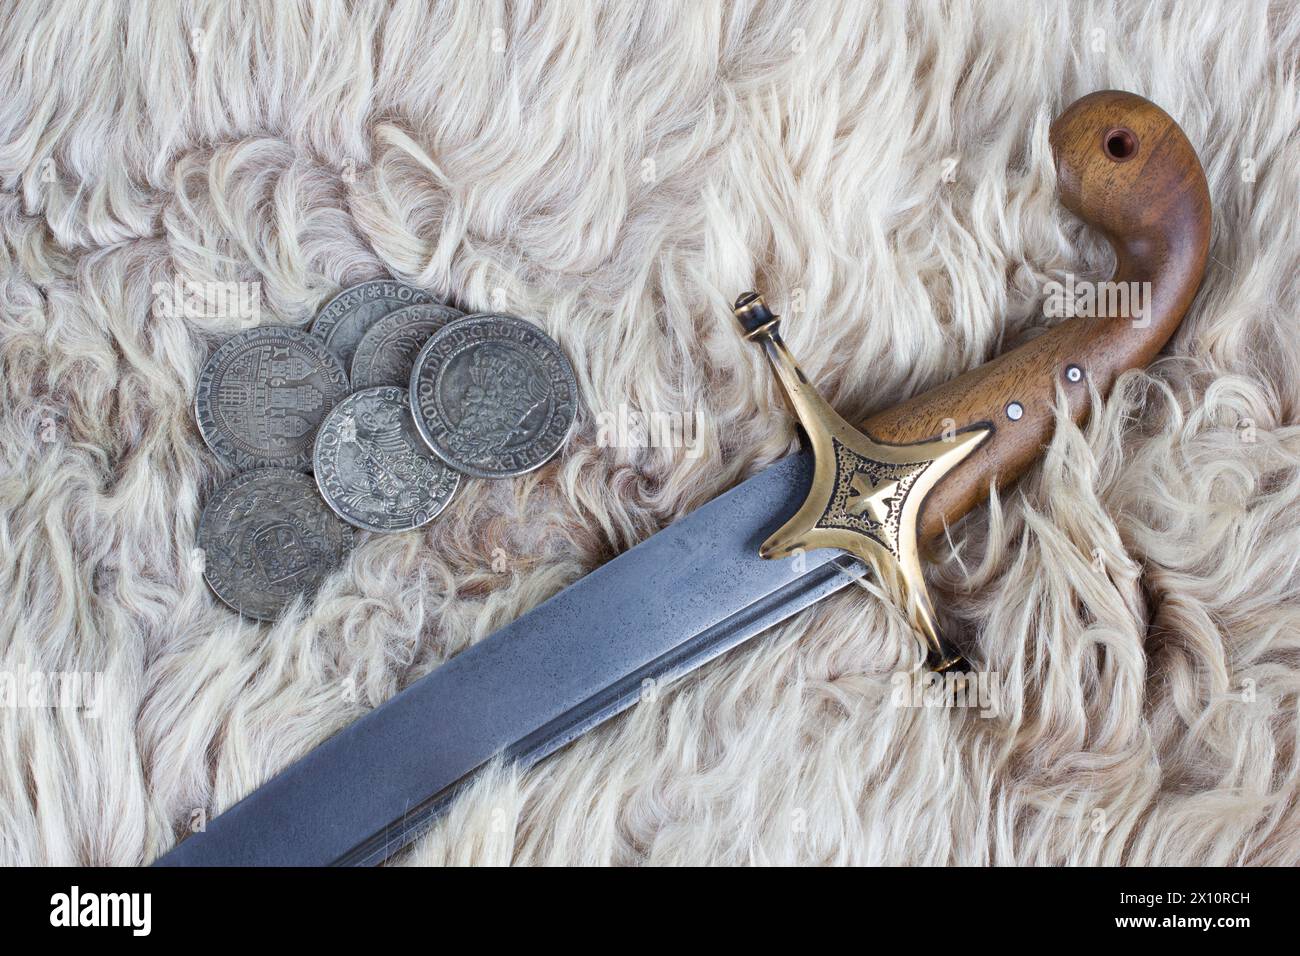 Ukraine Saber Sword with silver taller coins on fur background, 17th century. Poland, Lithuania, Hungary, Ukraine. Stock Photo